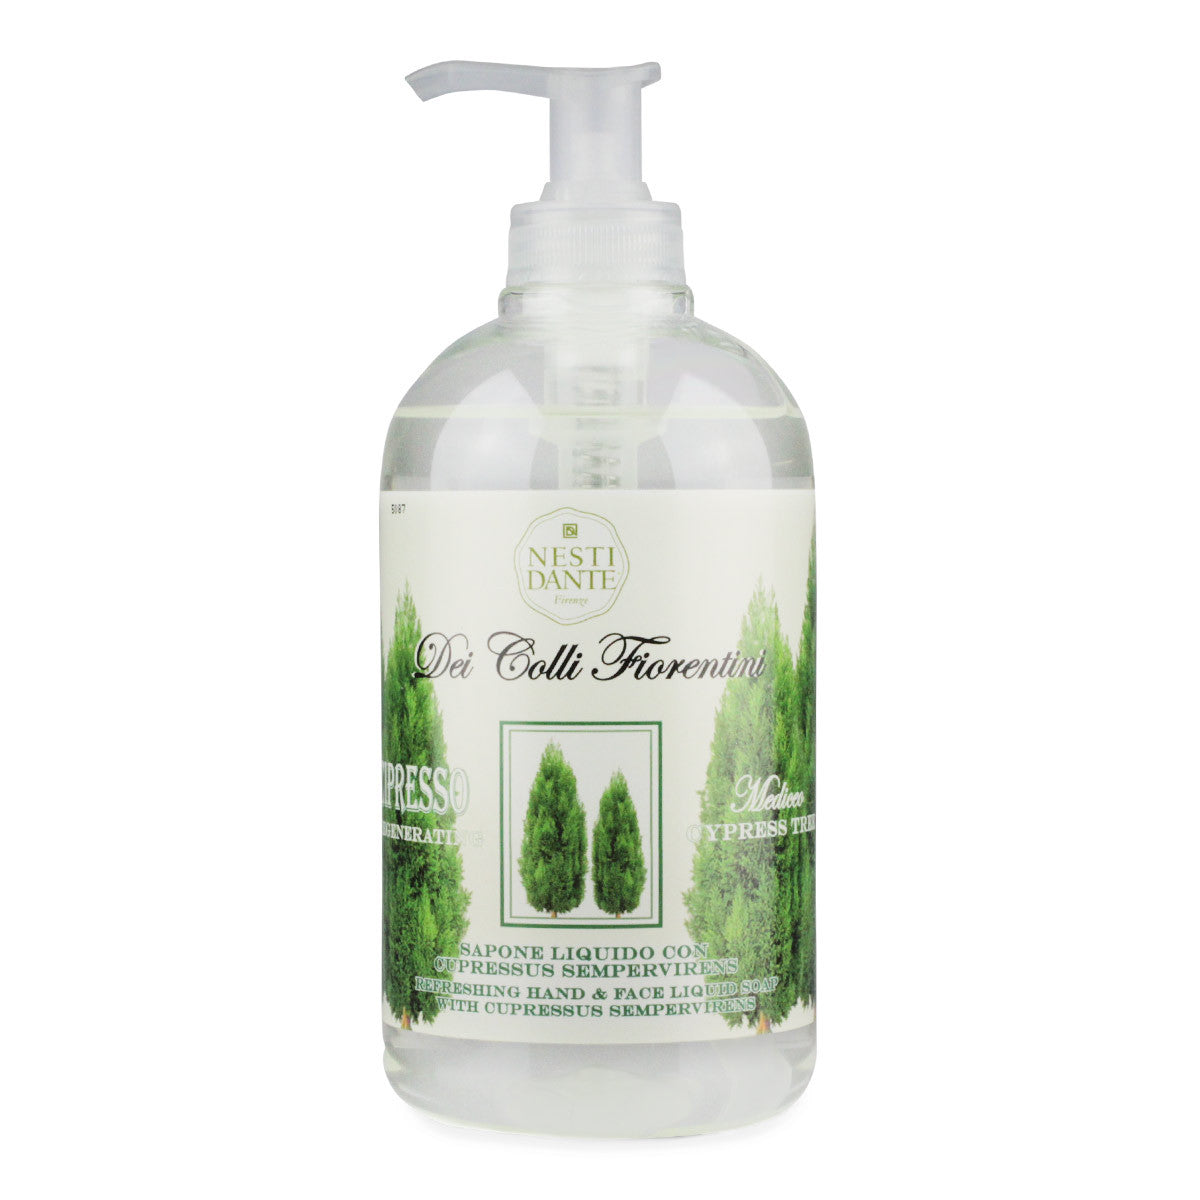 Primary image of Cypress Tree Hand Soap